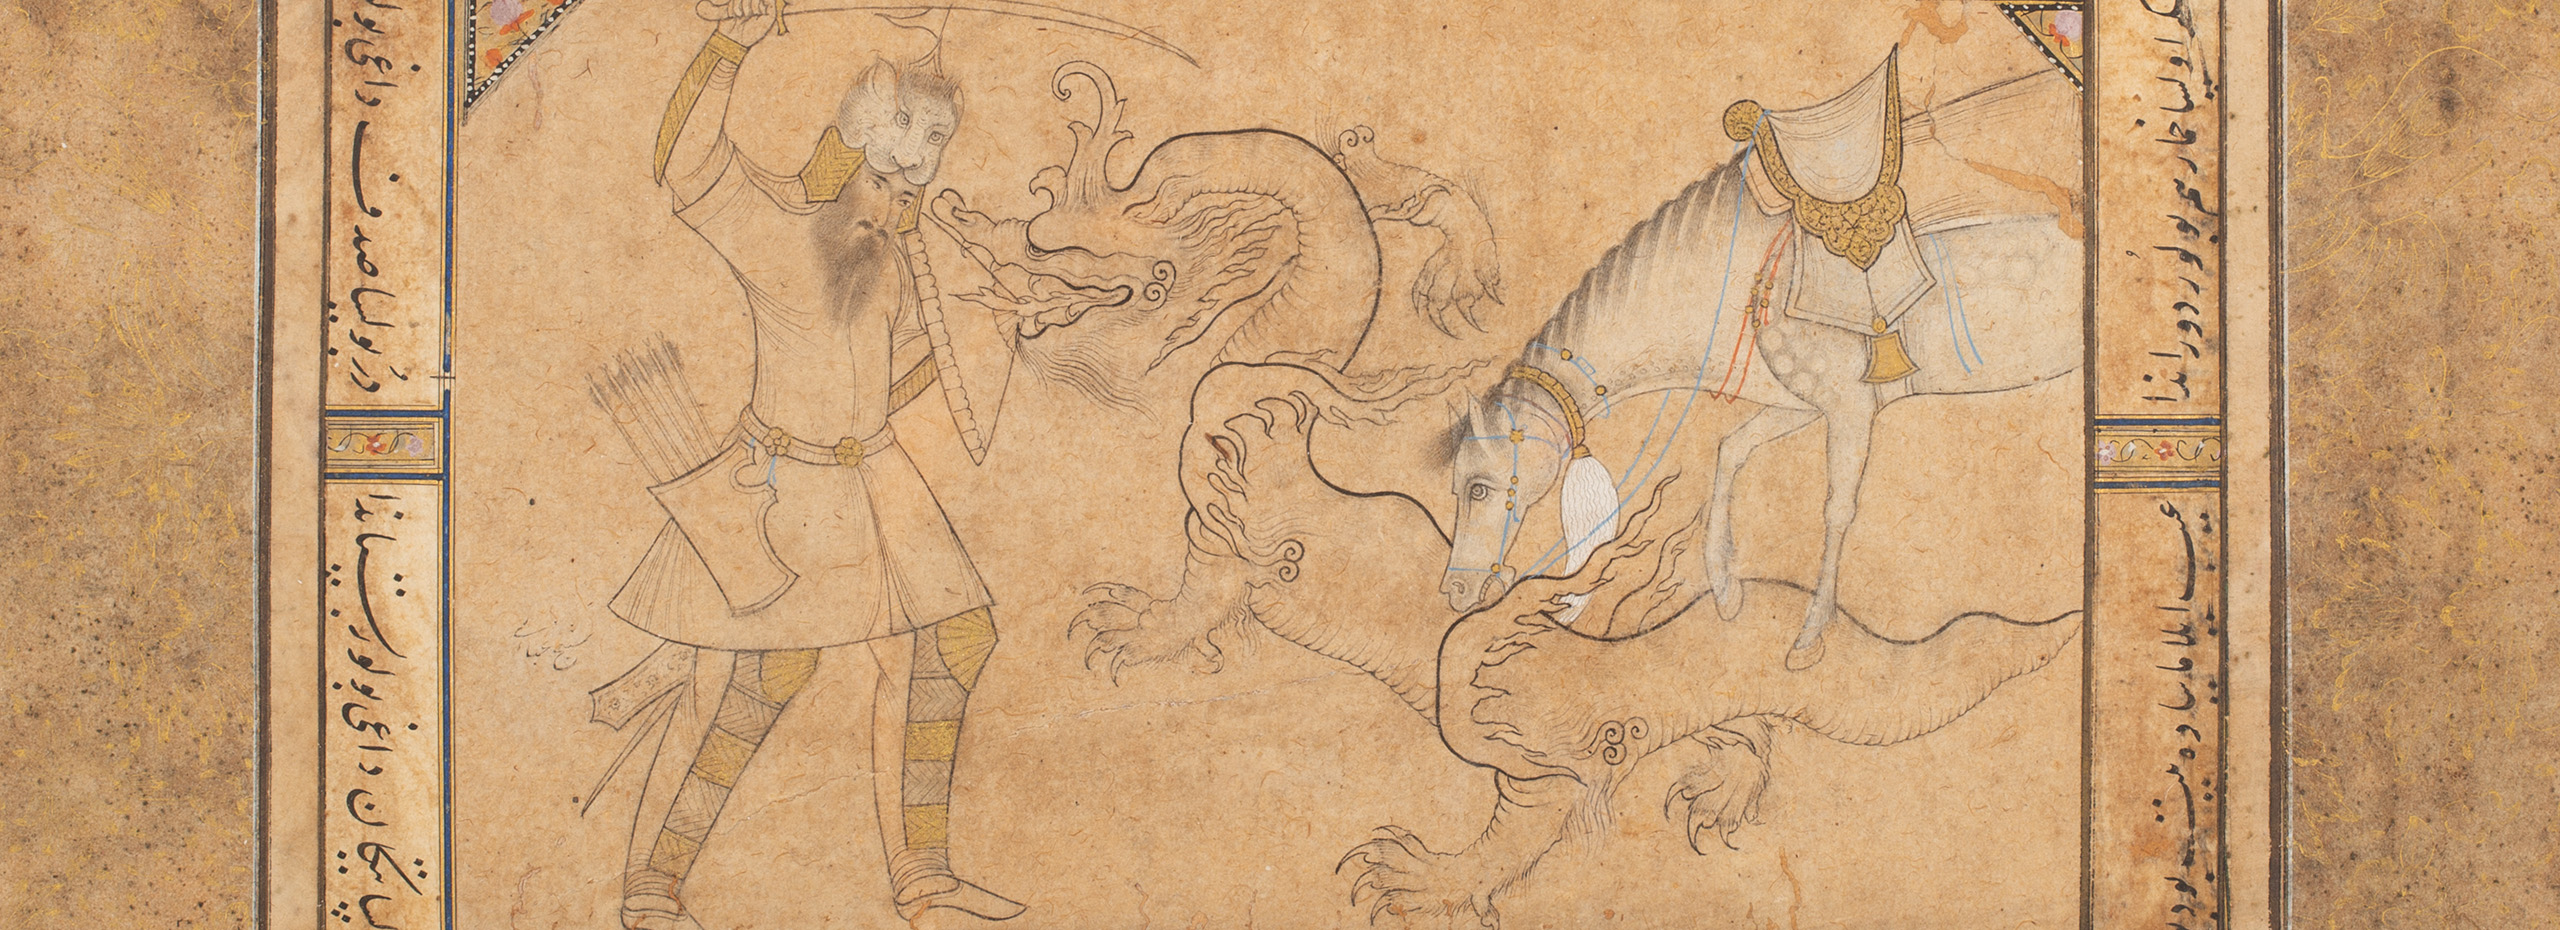 A drawing of a warrior and his horse battling a dragon